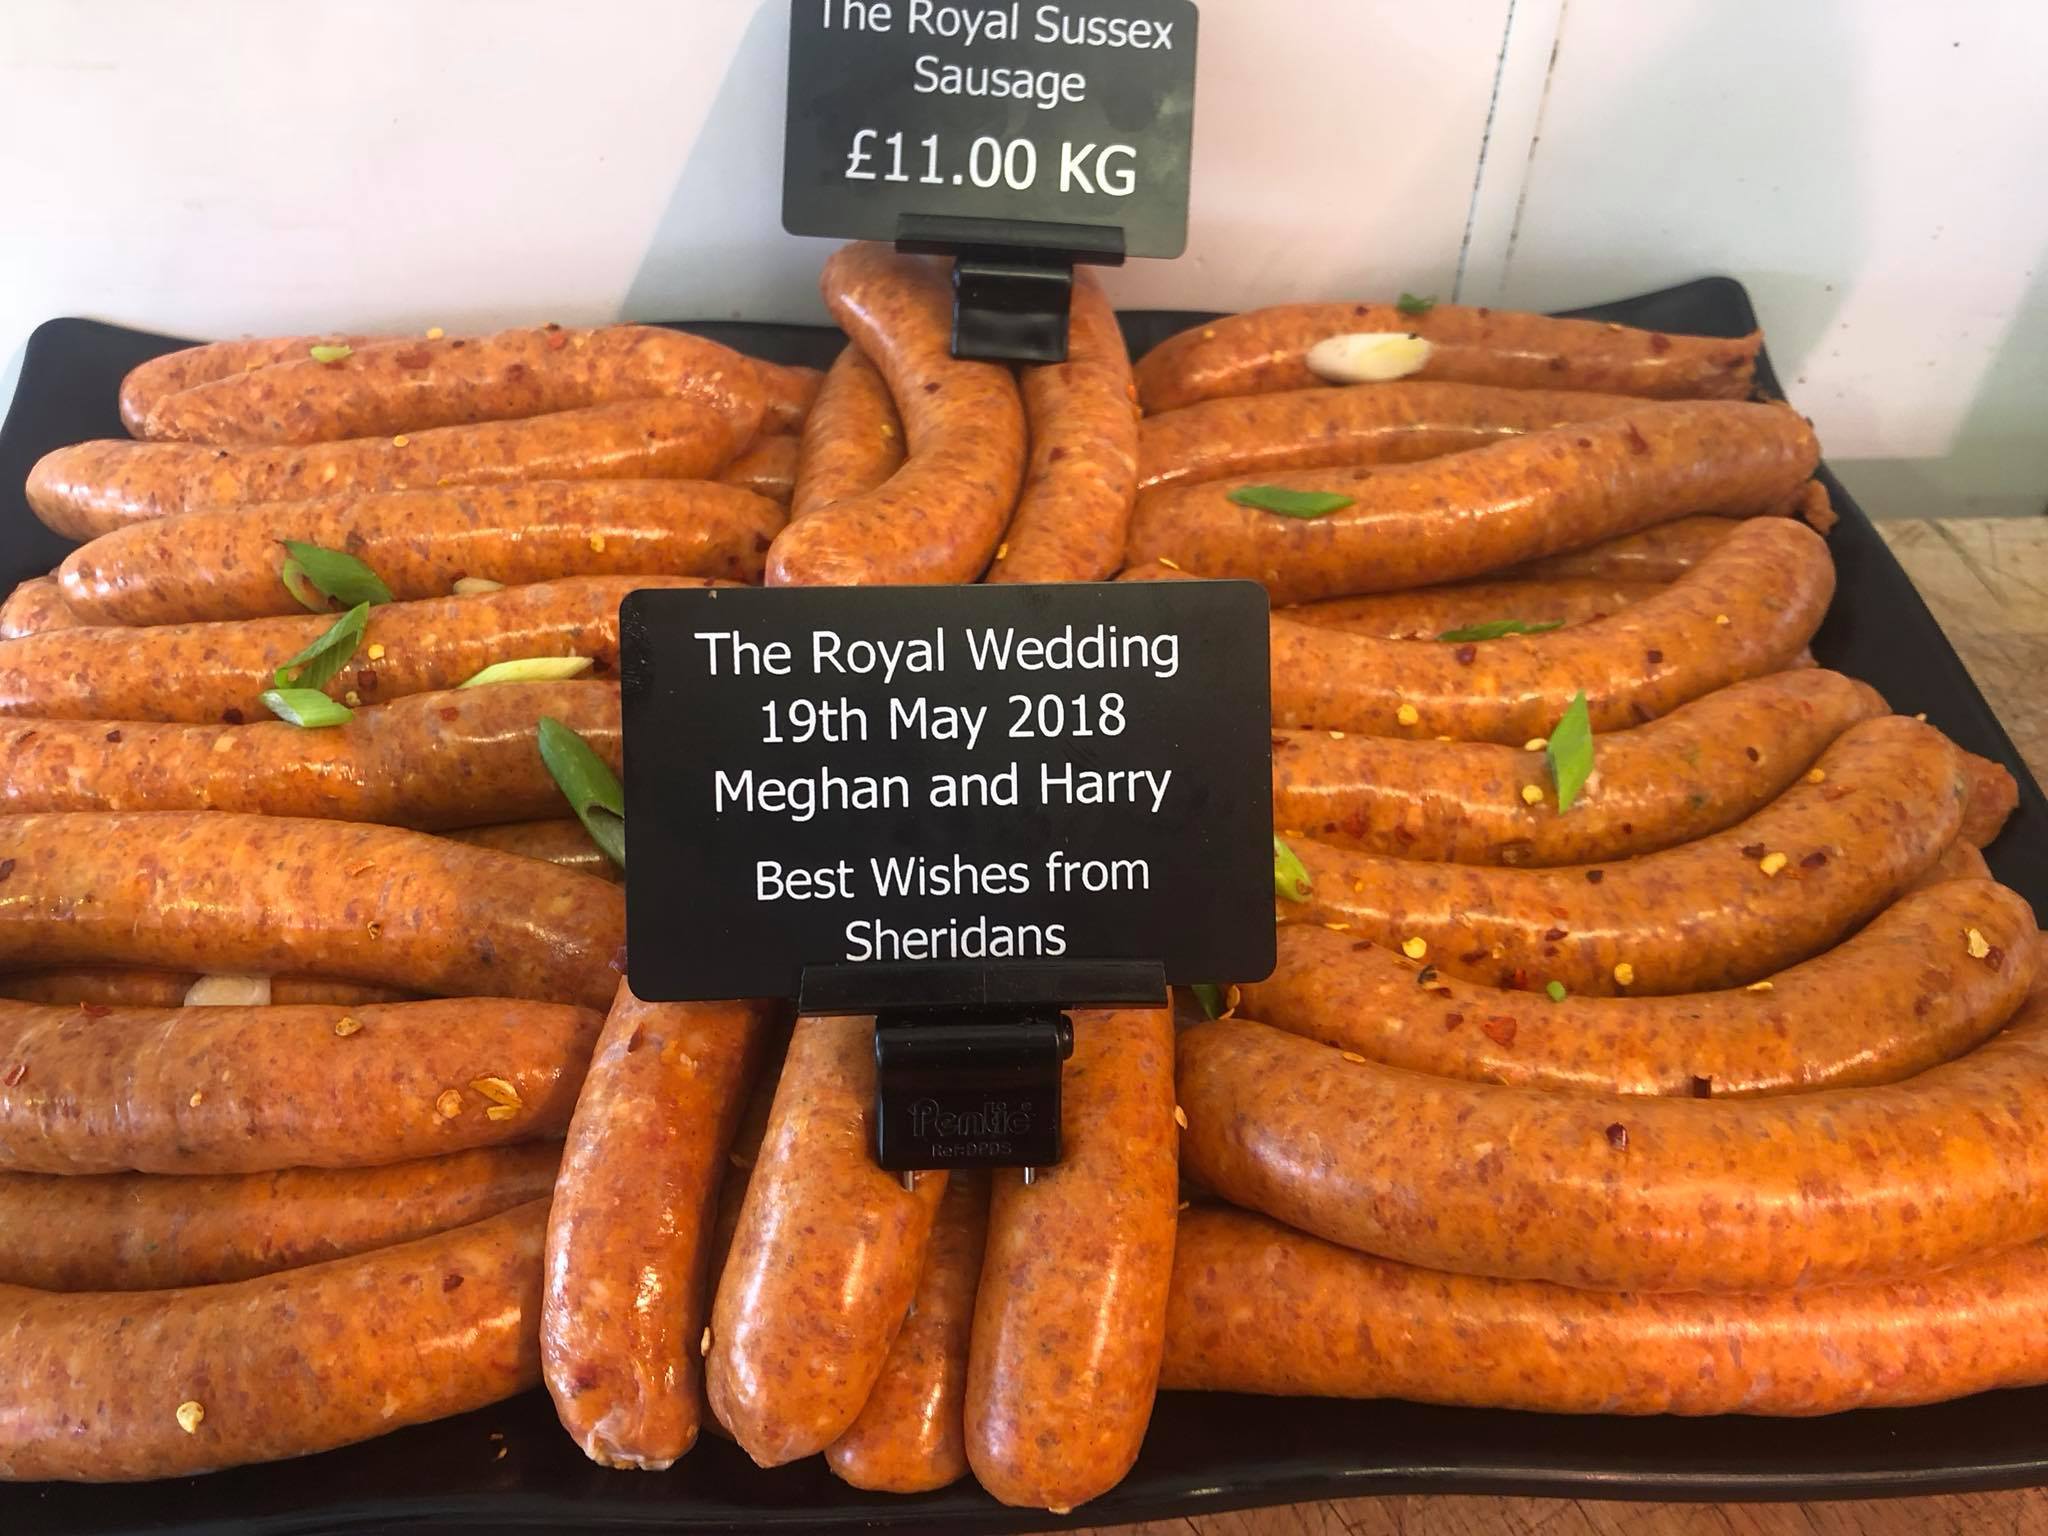 The Royal Sussex Sausage made by Sheridans in Ballater.